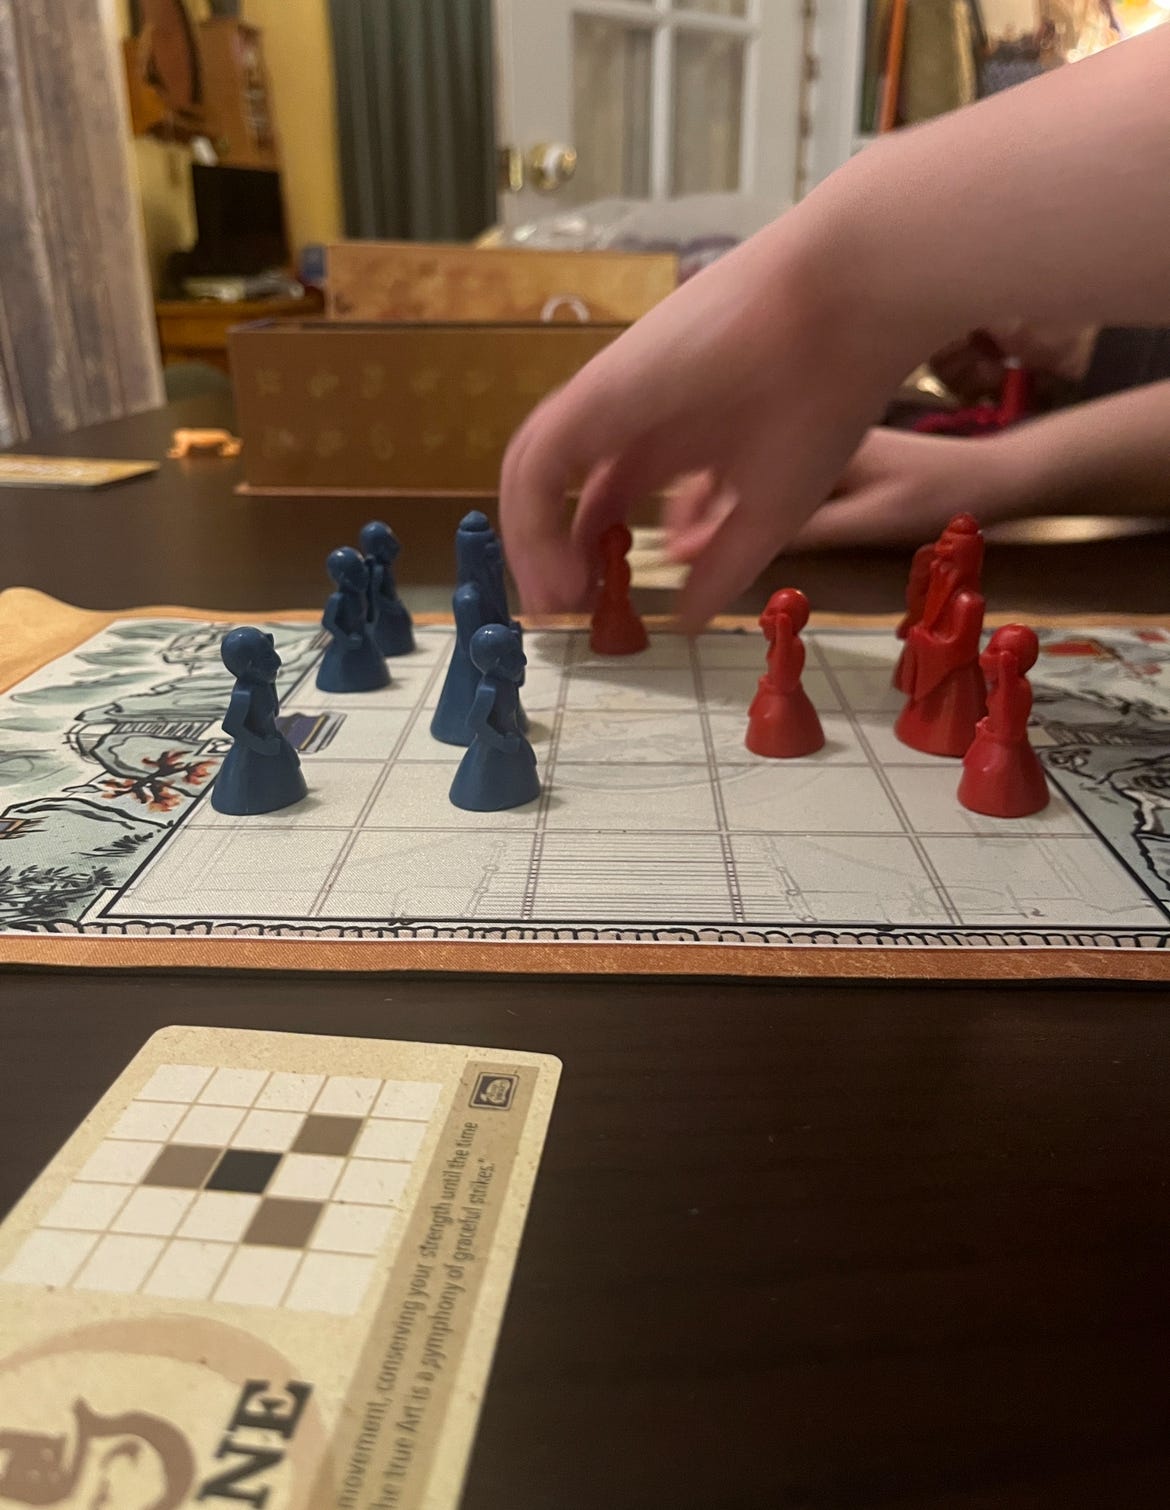 a small board game that looks a bit like chess with red and blue coloured game pieces on a checkered board